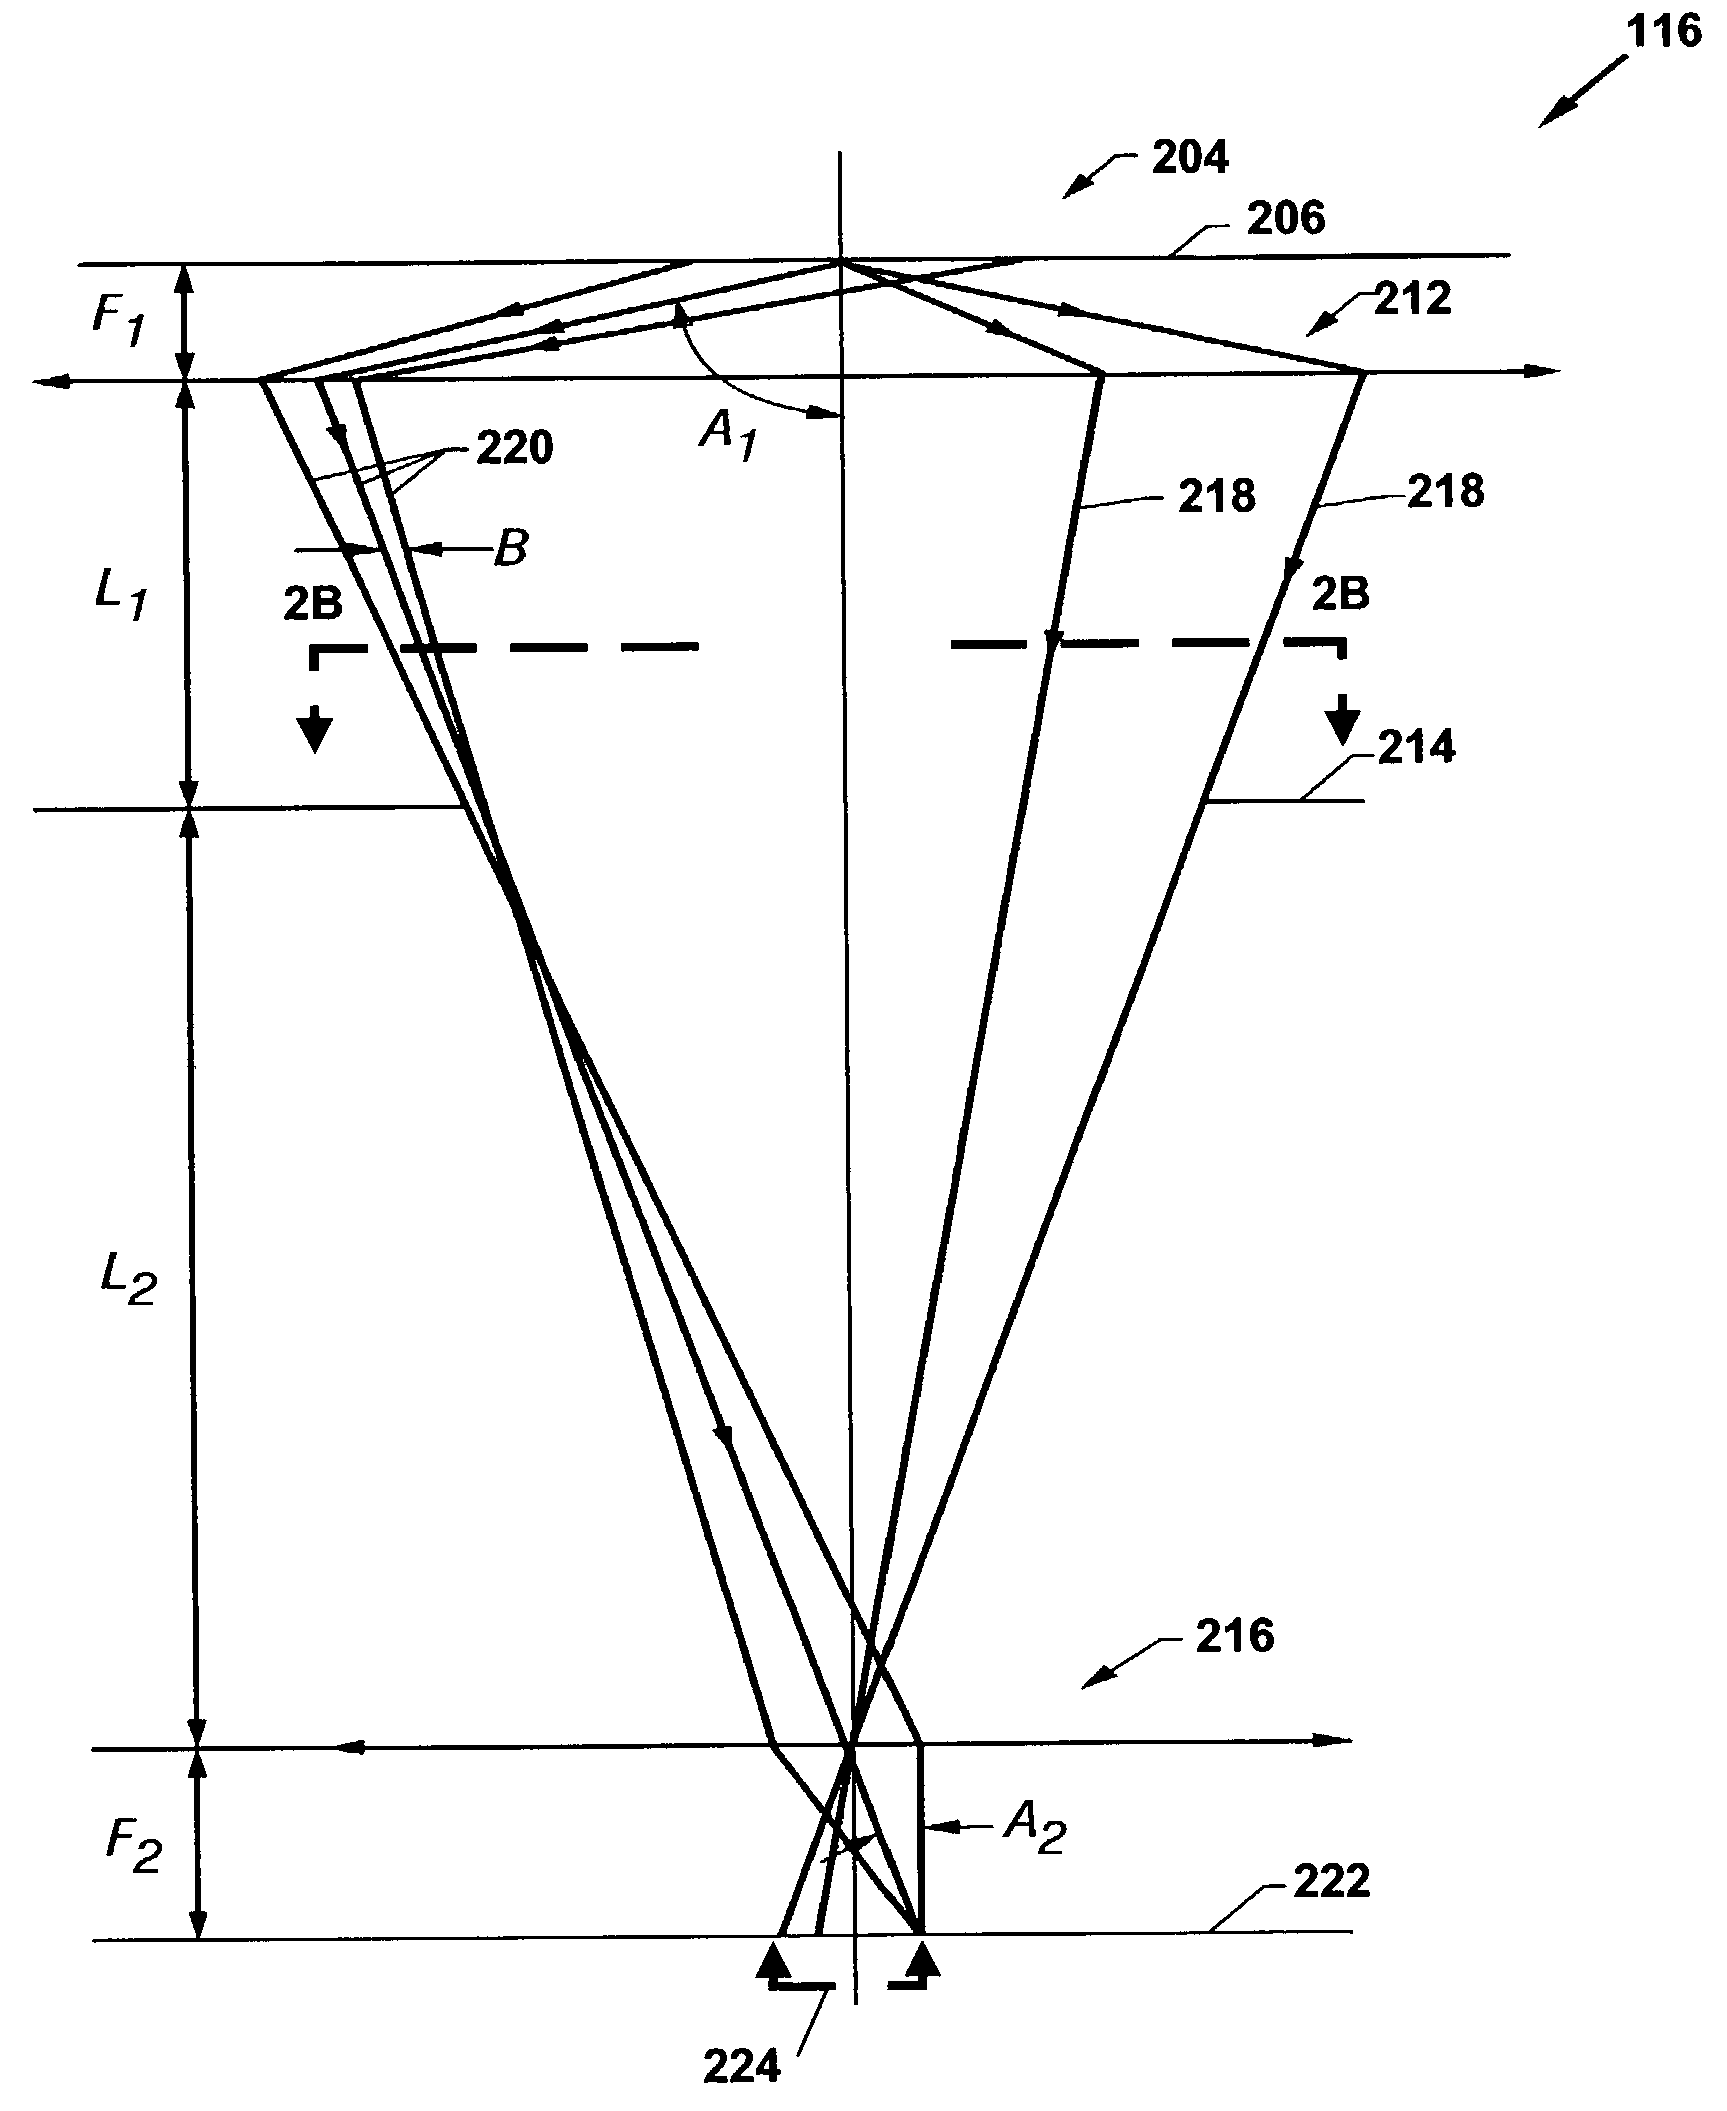 Fabrication of three dimensional structures